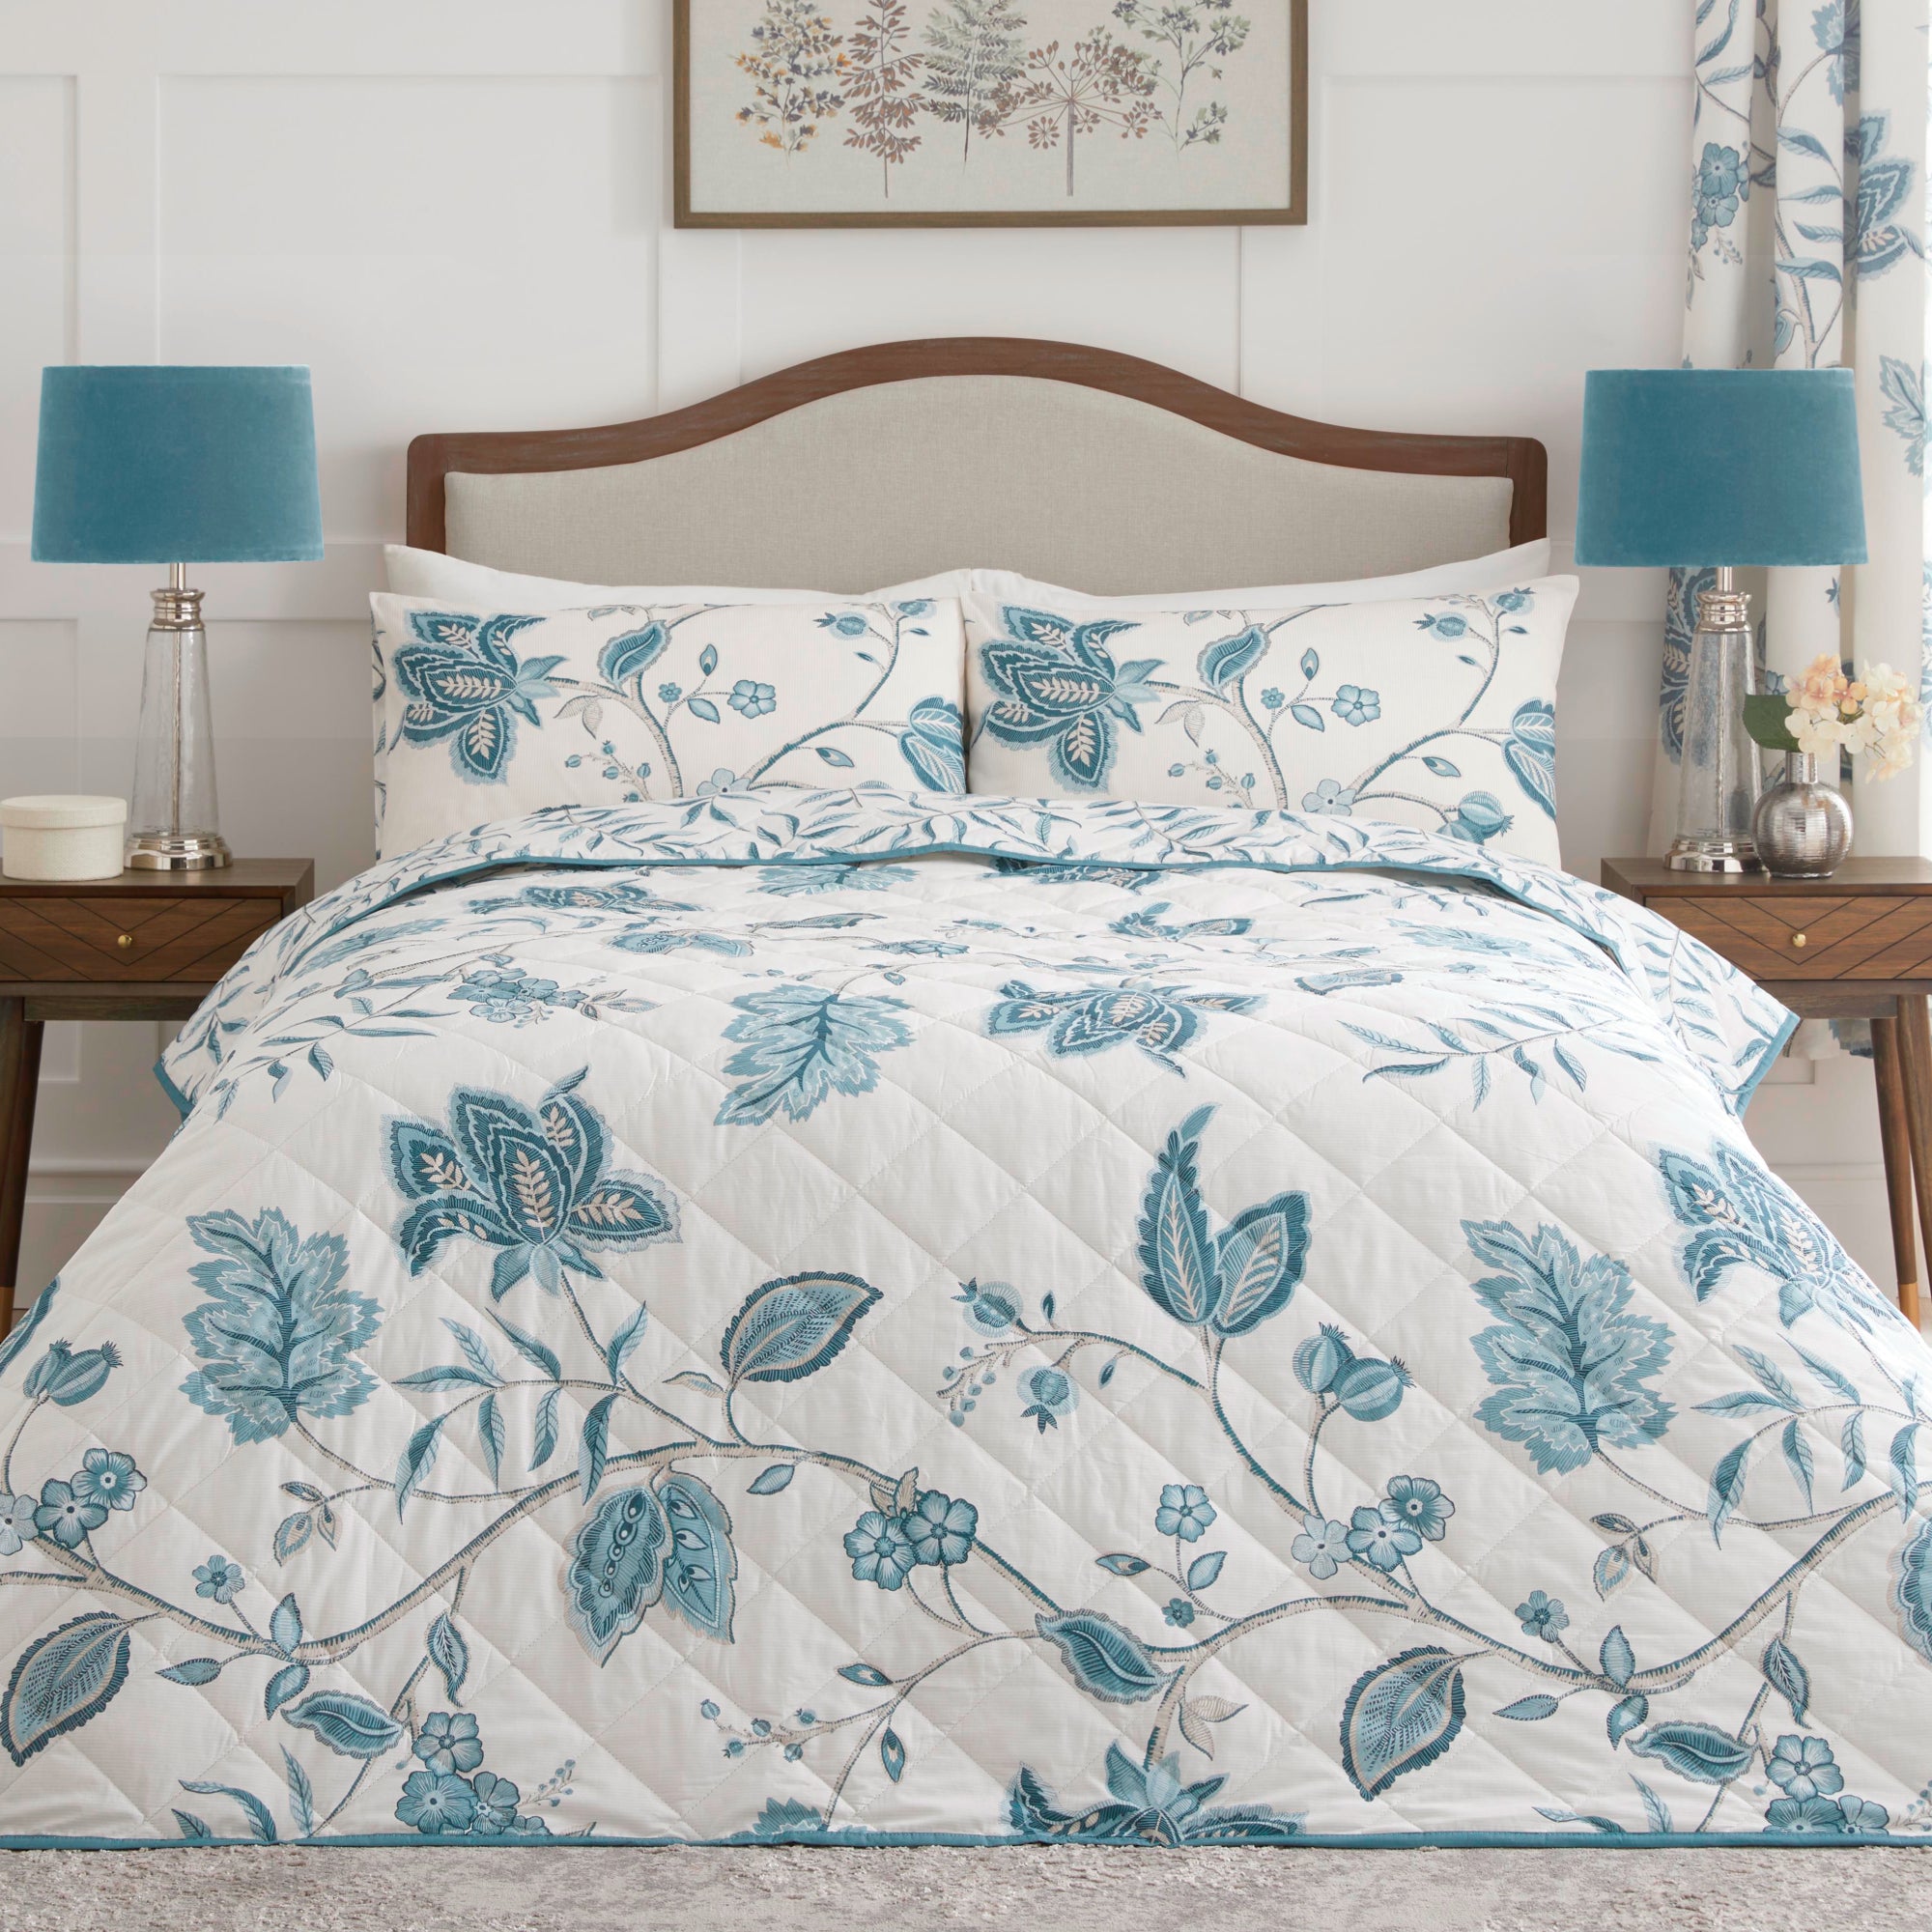 Bedspread Samira by Dreams And Drapes Design in Teal